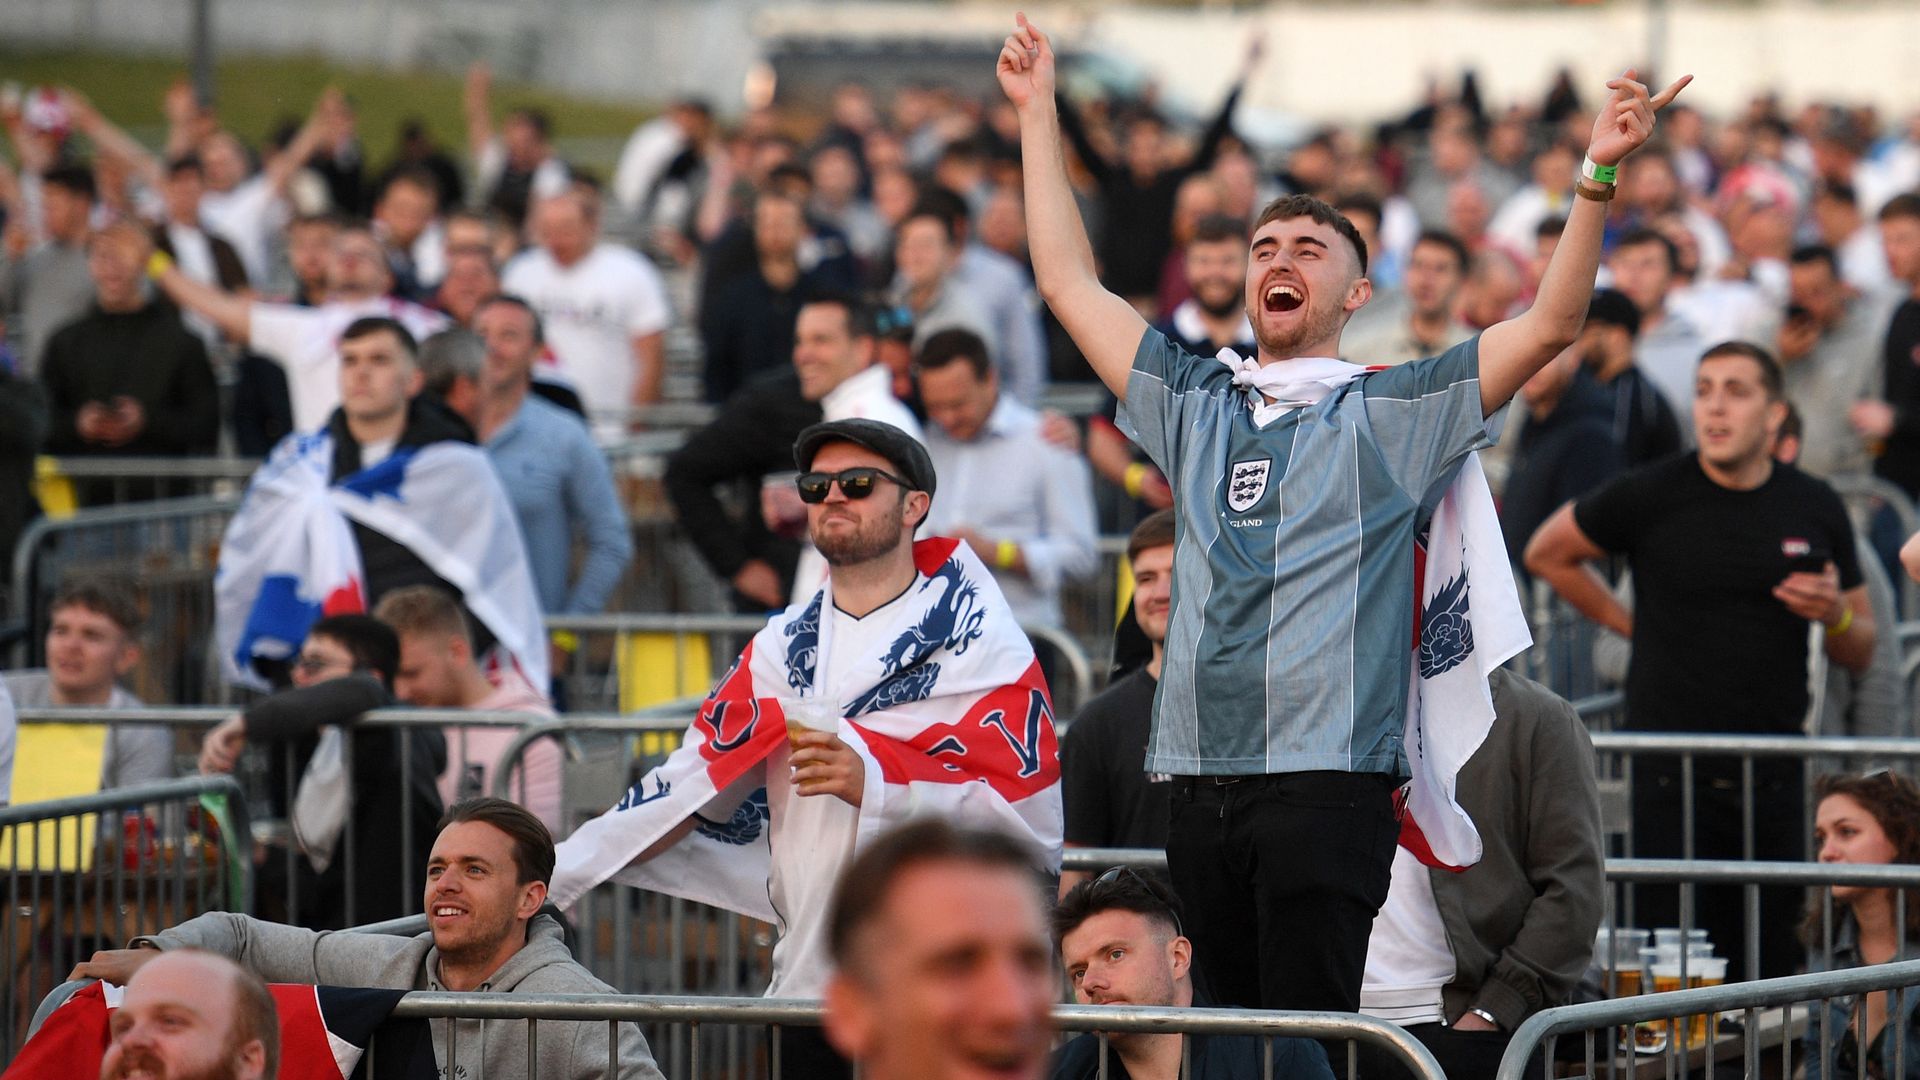 England supporters react to the news that Scotland have conceded a second goal to Croatia.